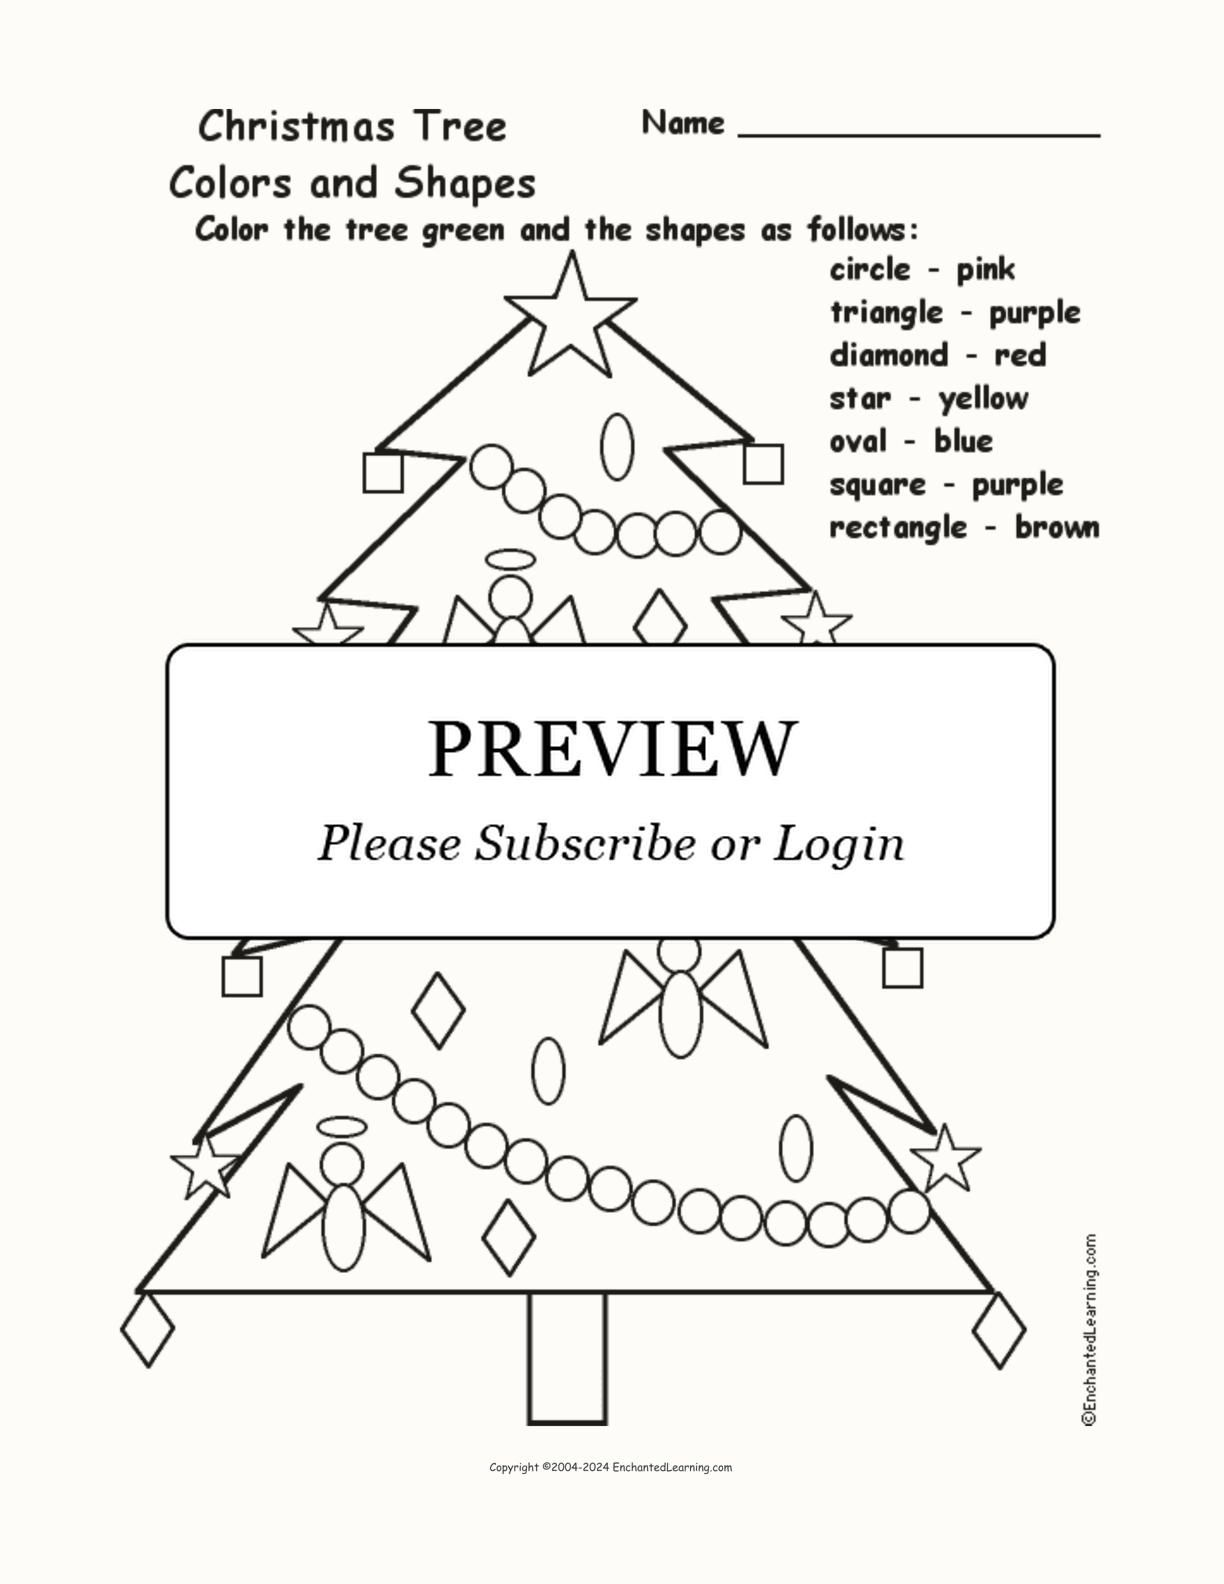 Christmas Tree: Colors and Shapes interactive worksheet page 1